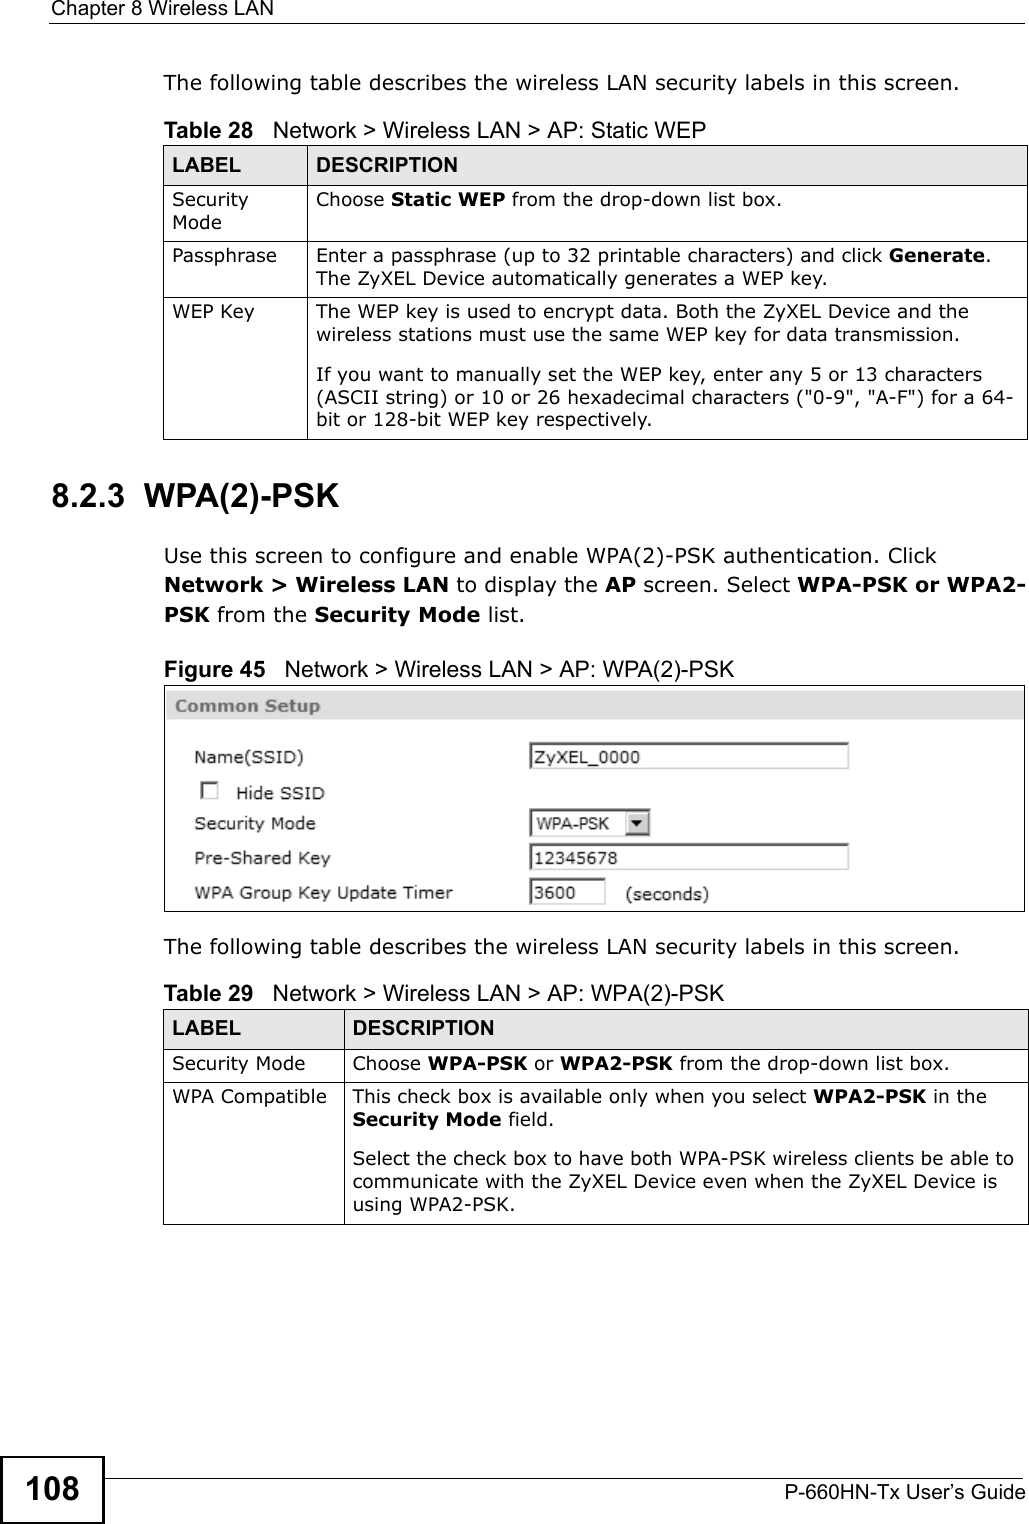 Chapter 8 Wireless LANP-660HN-Tx User’s Guide108The following table describes the wireless LAN security labels in this screen.8.2.3  WPA(2)-PSKUse this screen to configure and enable WPA(2)-PSK authentication. Click Network &gt; Wireless LAN to display the AP screen. Select WPA-PSK or WPA2-PSK from the Security Mode list.Figure 45   Network &gt; Wireless LAN &gt; AP: WPA(2)-PSKThe following table describes the wireless LAN security labels in this screen.Table 28   Network &gt; Wireless LAN &gt; AP: Static WEPLABEL DESCRIPTIONSecurity ModeChoose Static WEP from the drop-down list box.Passphrase Enter a passphrase (up to 32 printable characters) and click Generate. The ZyXEL Device automatically generates a WEP key.WEP Key The WEP key is used to encrypt data. Both the ZyXEL Device and the wireless stations must use the same WEP key for data transmission.If you want to manually set the WEP key, enter any 5 or 13 characters (ASCII string) or 10 or 26 hexadecimal characters (&quot;0-9&quot;, &quot;A-F&quot;) for a 64-bit or 128-bit WEP key respectively.Table 29   Network &gt; Wireless LAN &gt; AP: WPA(2)-PSKLABEL DESCRIPTIONSecurity Mode Choose WPA-PSK or WPA2-PSK from the drop-down list box.WPA Compatible This check box is available only when you select WPA2-PSK in the Security Mode field.Select the check box to have both WPA-PSK wireless clients be able to communicate with the ZyXEL Device even when the ZyXEL Device is using WPA2-PSK.